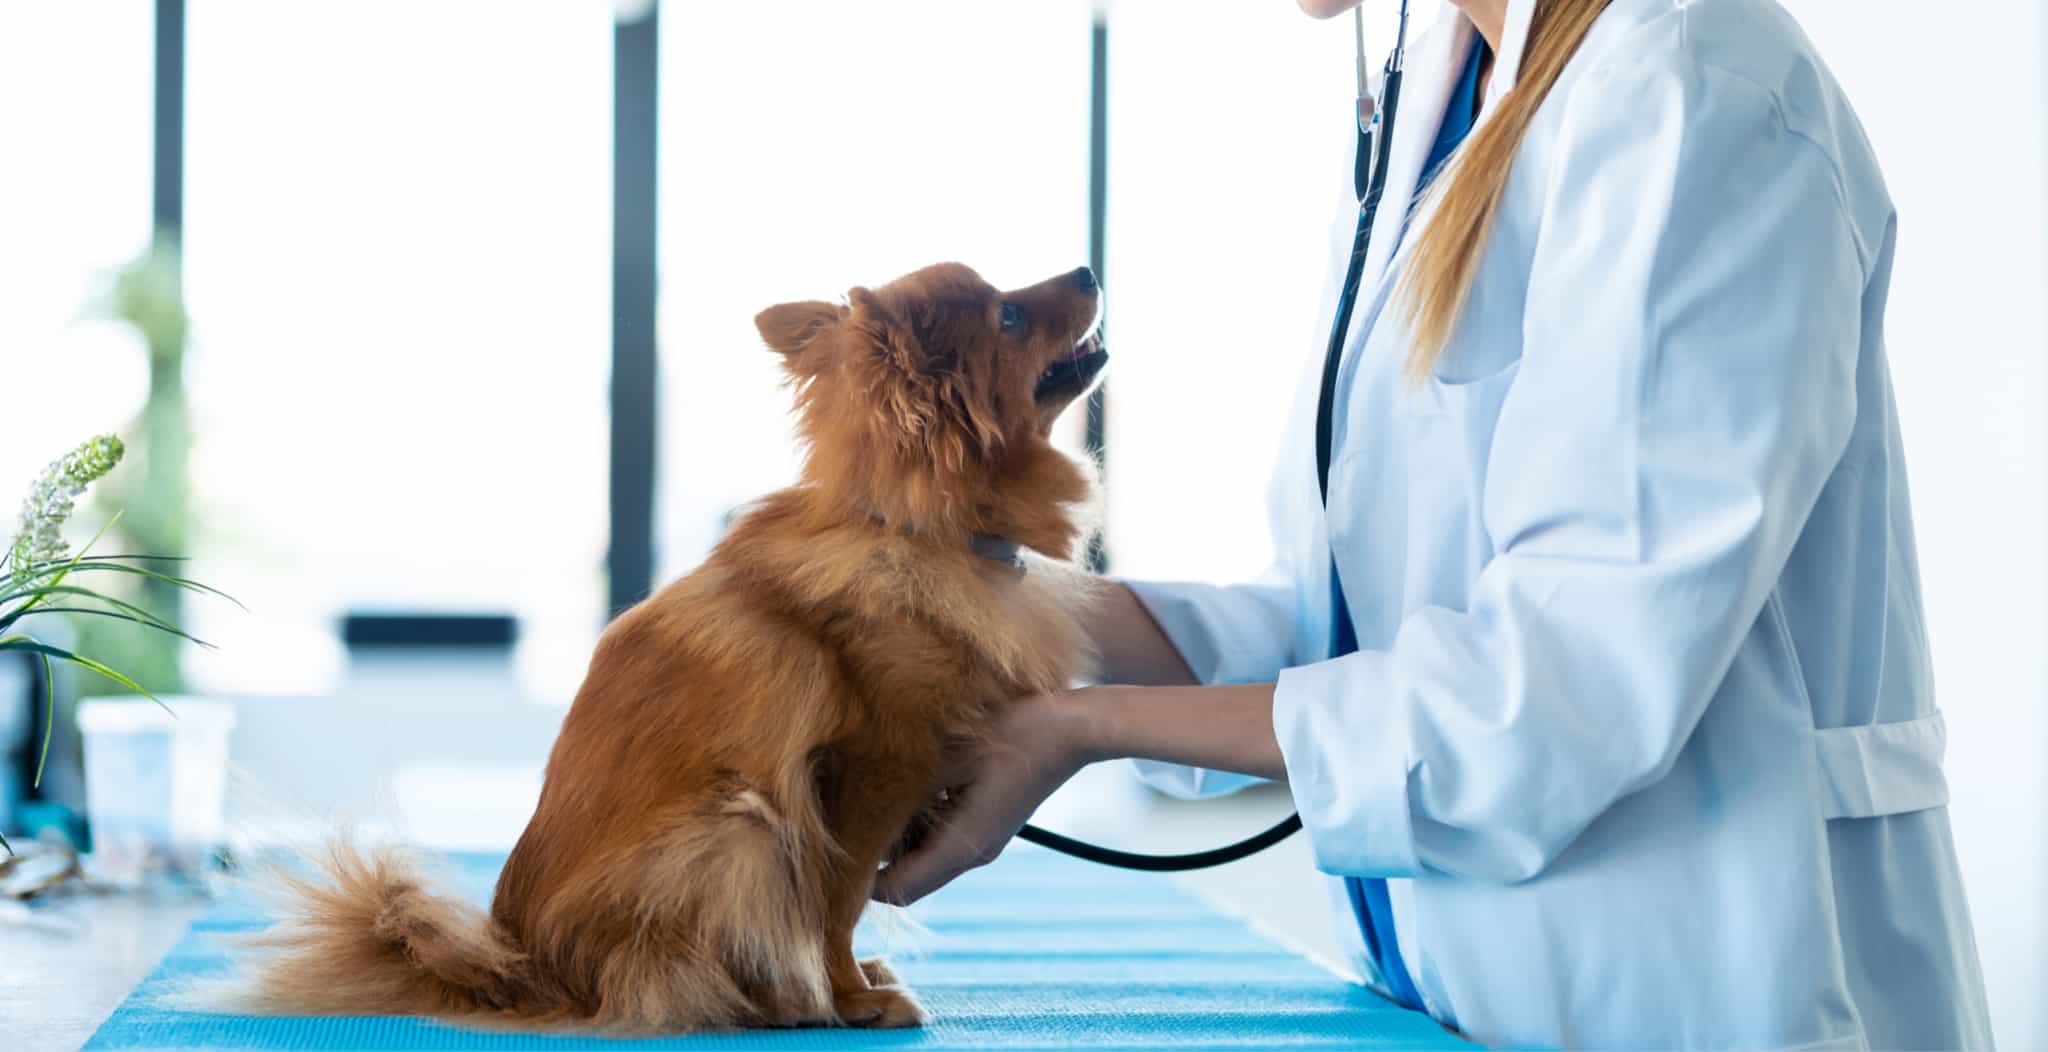 DOG Streamz clinical studies by independent authorities